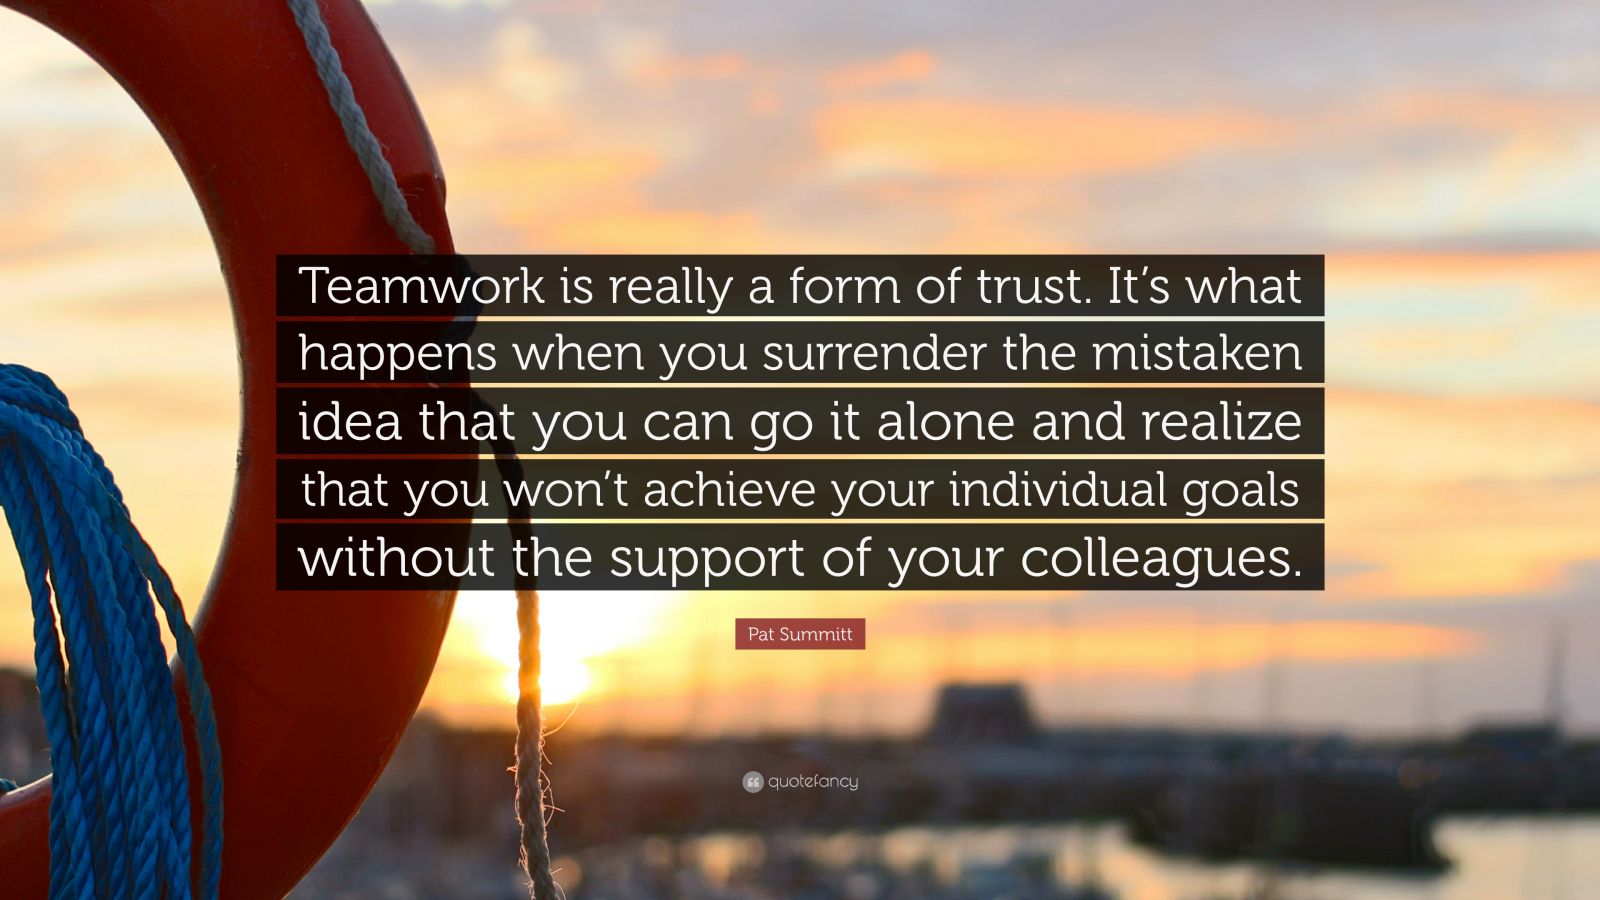 Pat Summitt Quote: “Teamwork is really a form of trust. It’s what